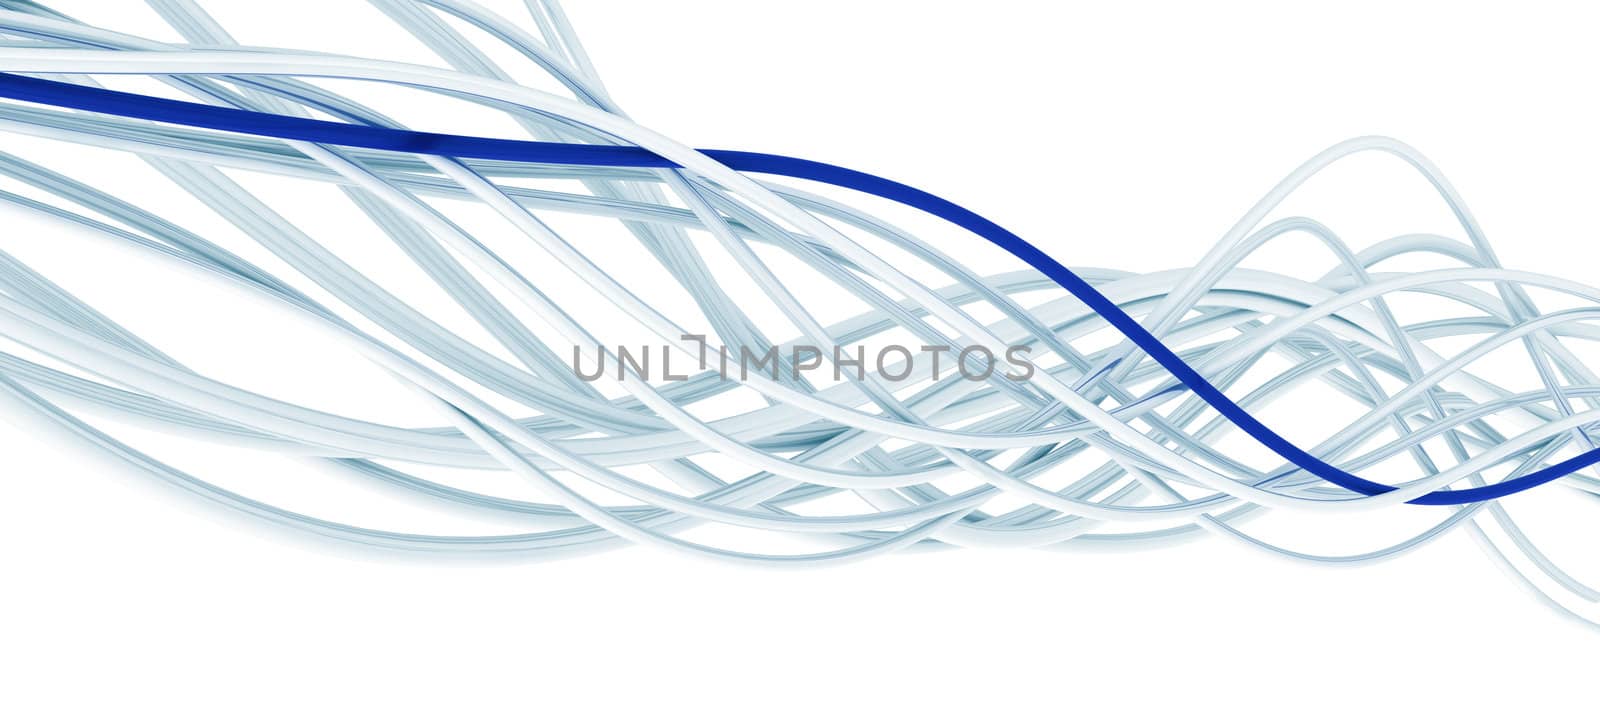 bright metallic fibre-optical blue and white cables on a white background